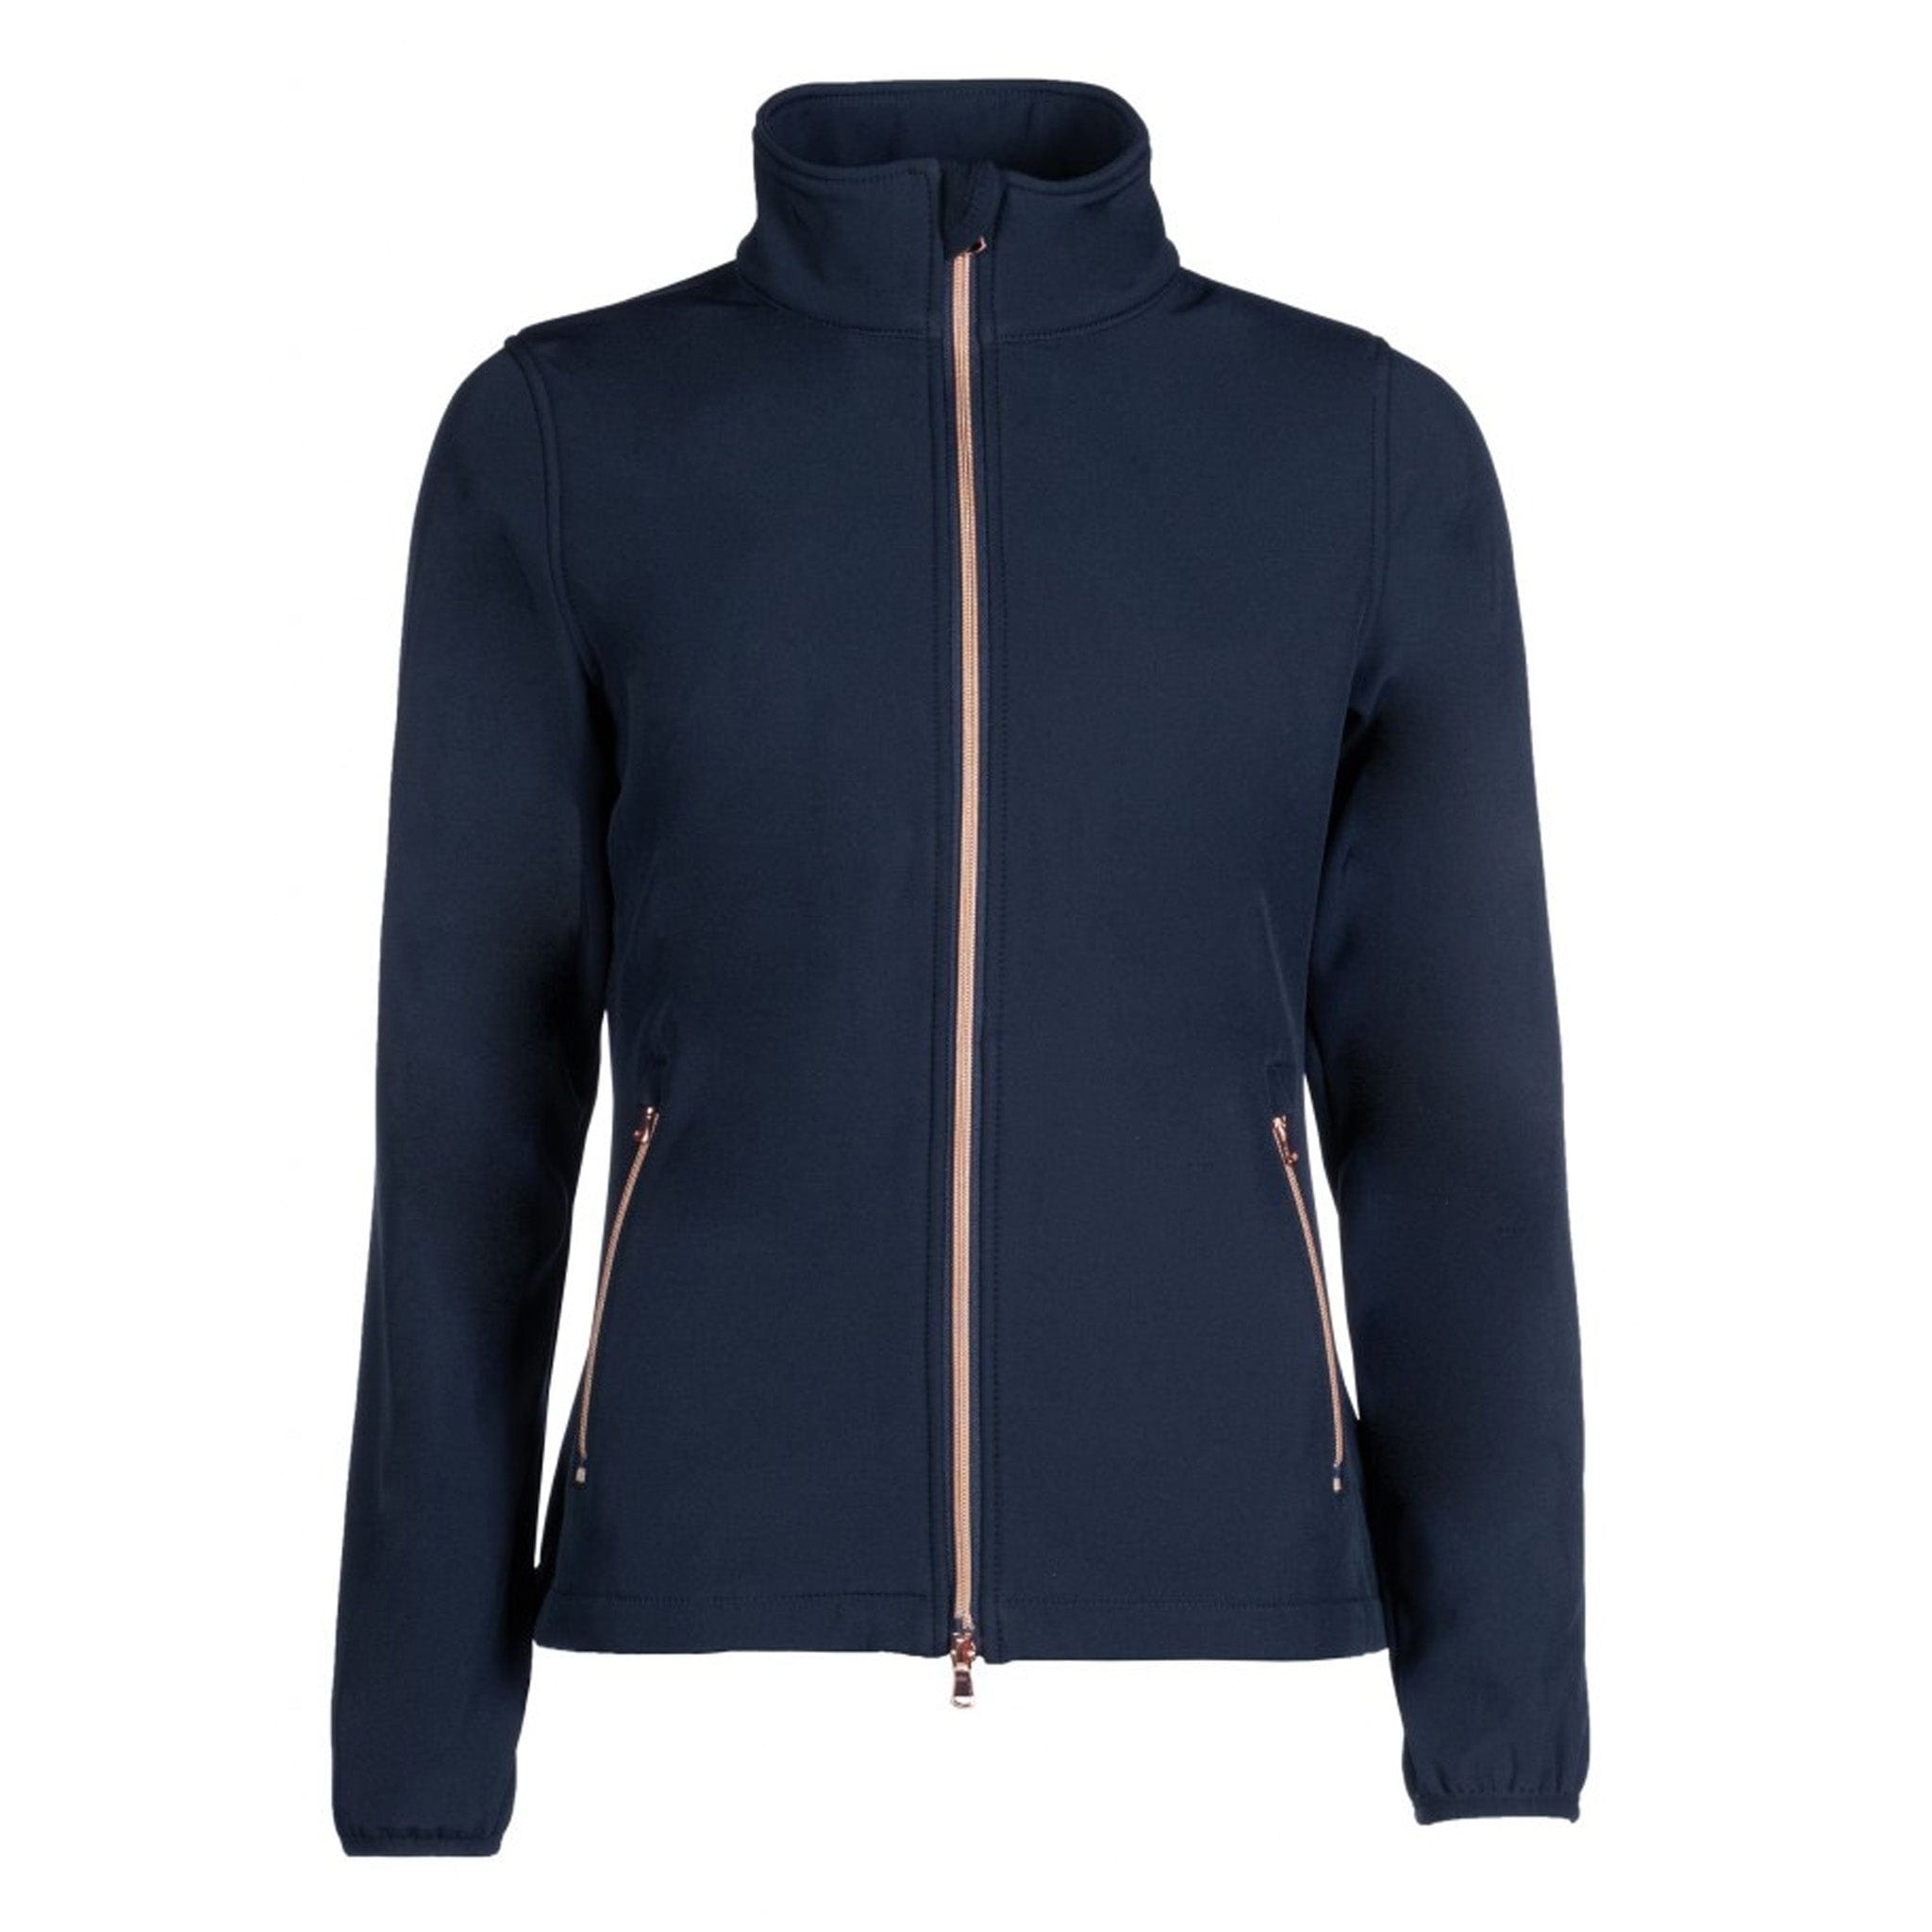 HKM Lily Softshell Jacket 13249 Navy Front View